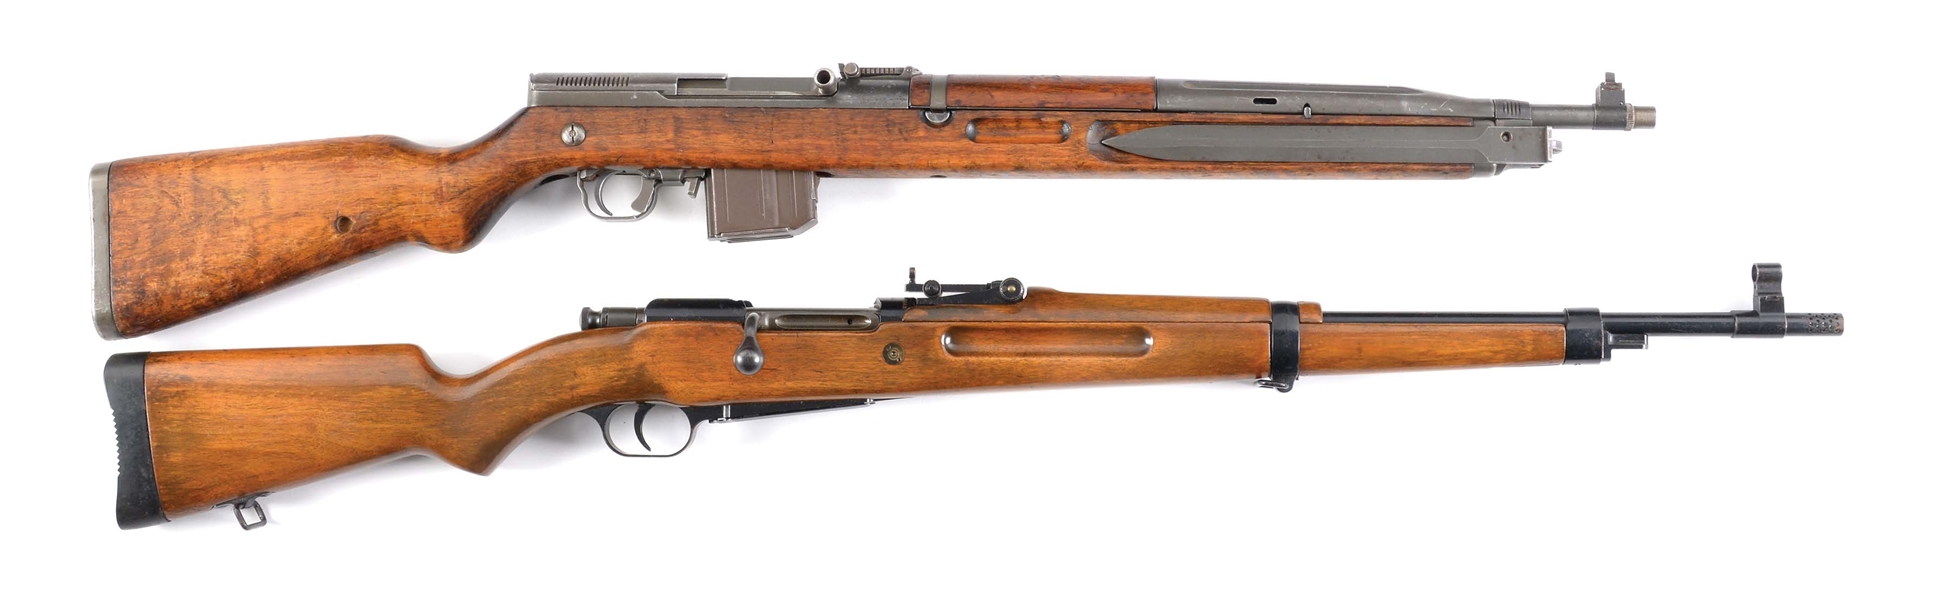 (C) LOT OF TWO: CZECH VZ. 52 AND MADSEN M47 MILITARY RIFLES.